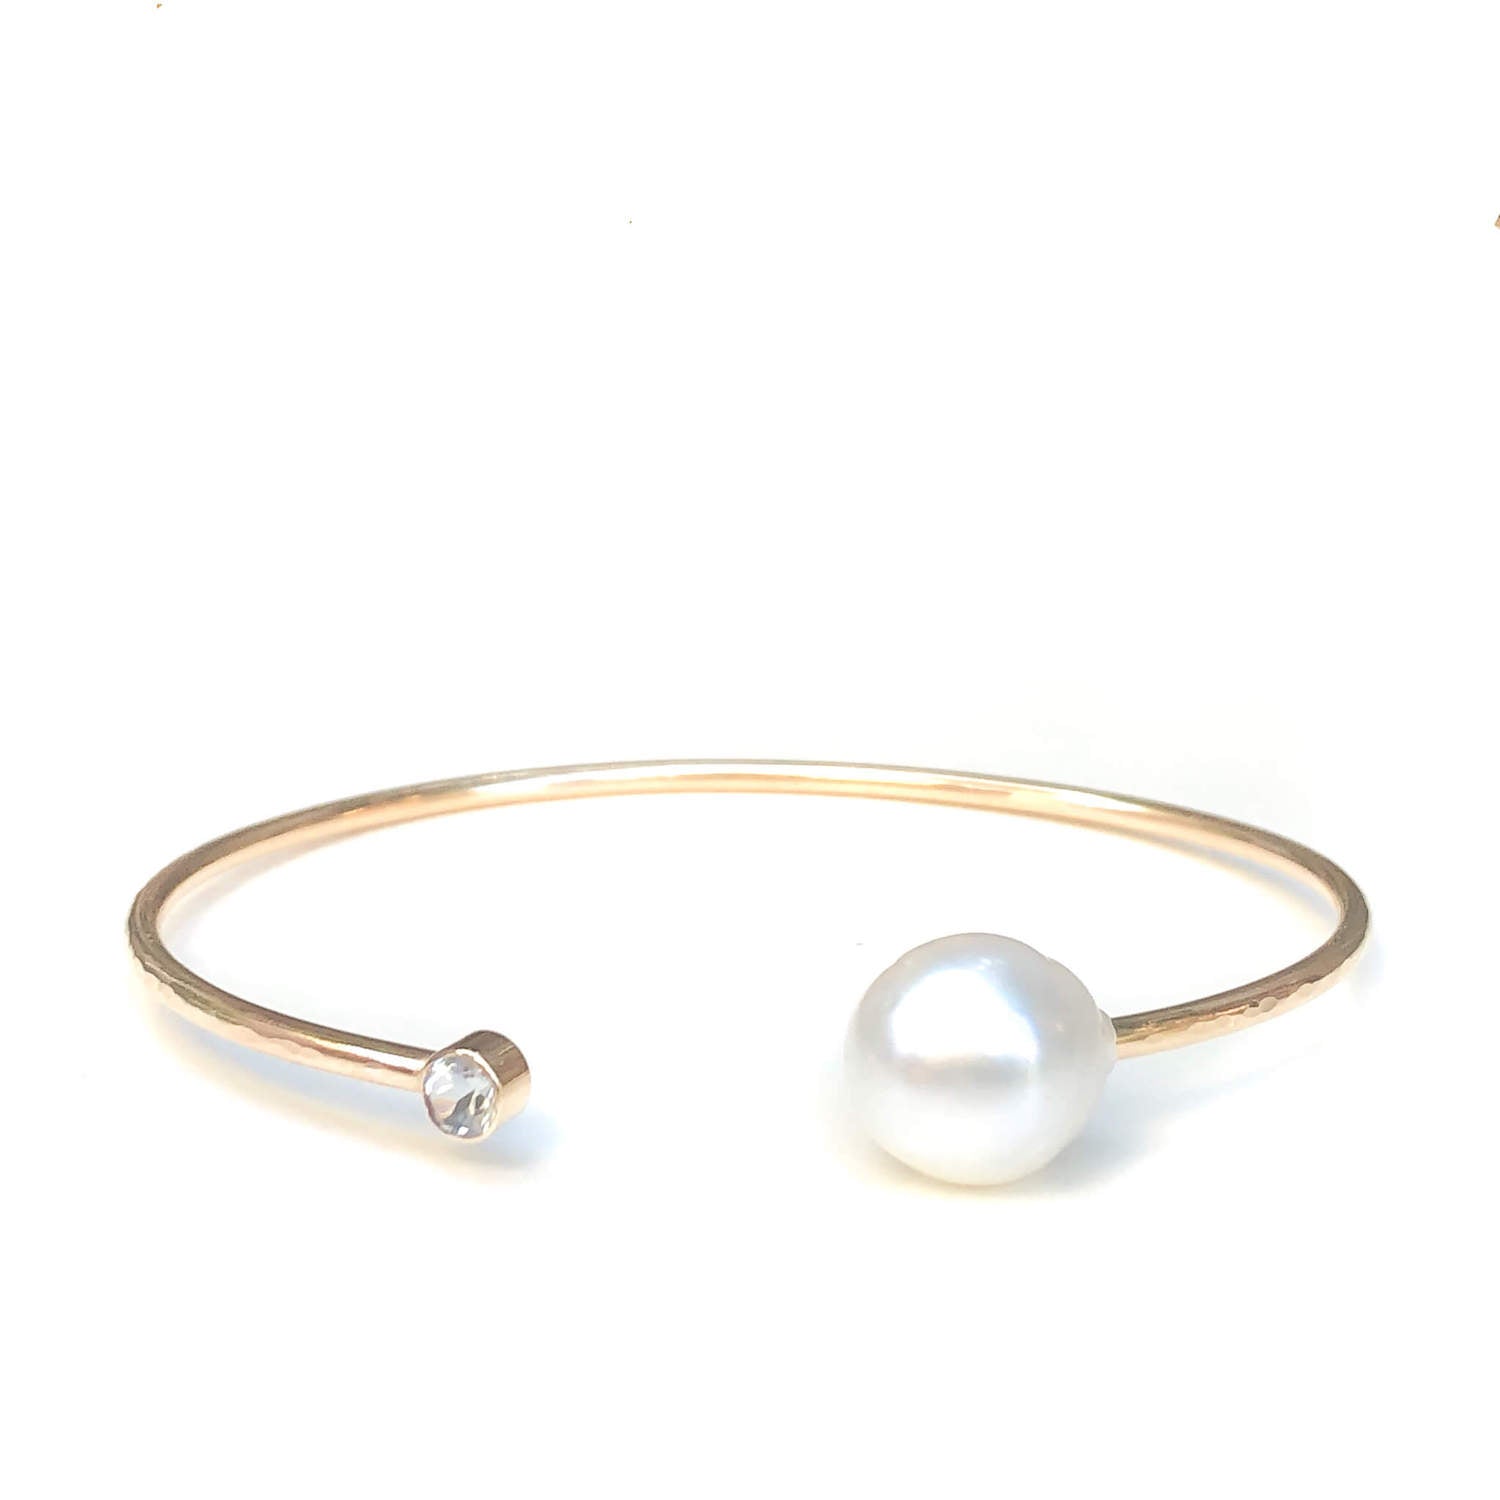 Gold Women's Cuff Bracelets With White South Sea Pearl